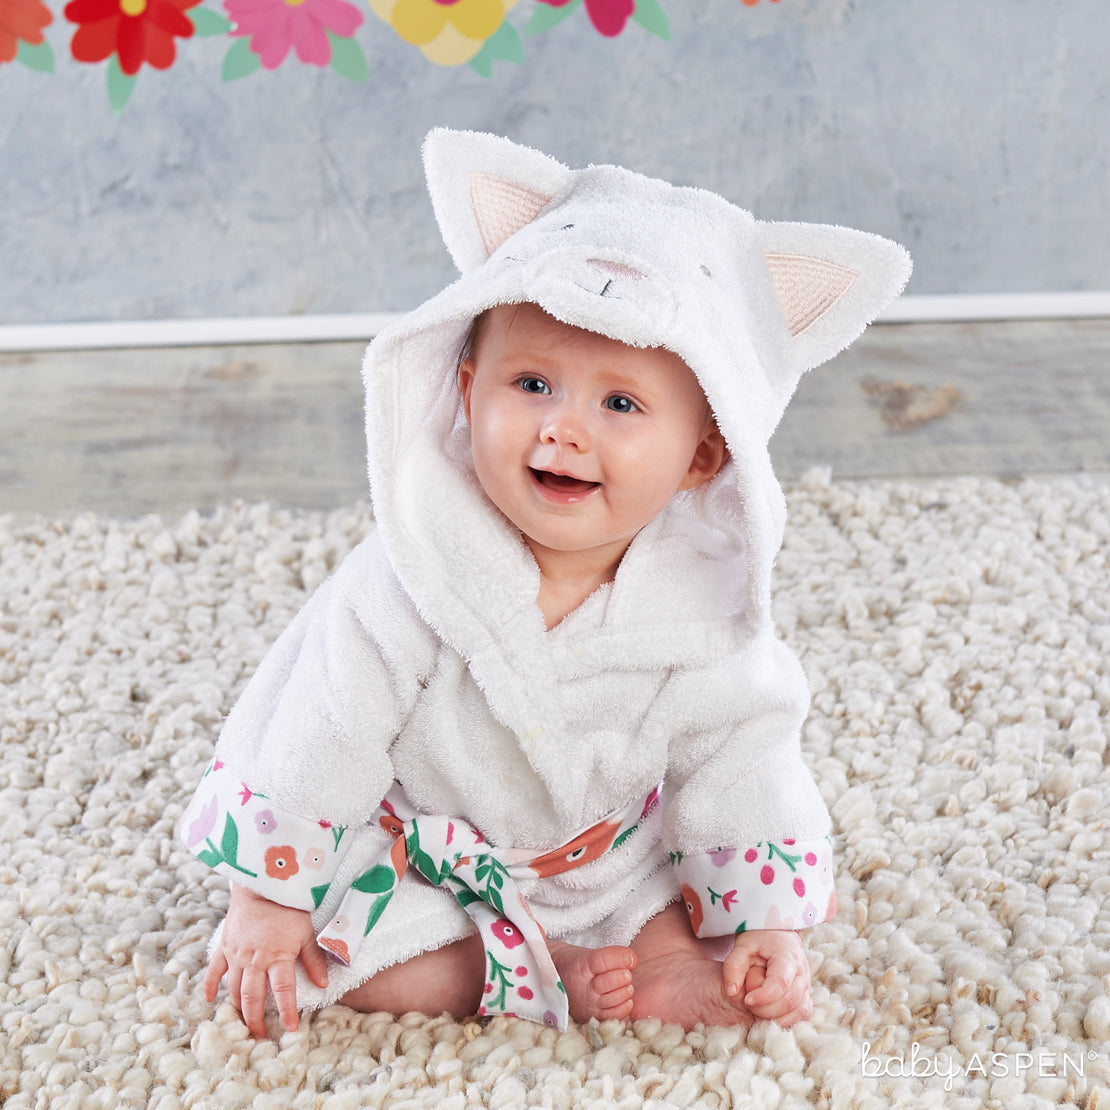 Cat Hooded Robe | Purrrfectly Adorable Gifts For Baby + A Giveaway | Baby Aspen